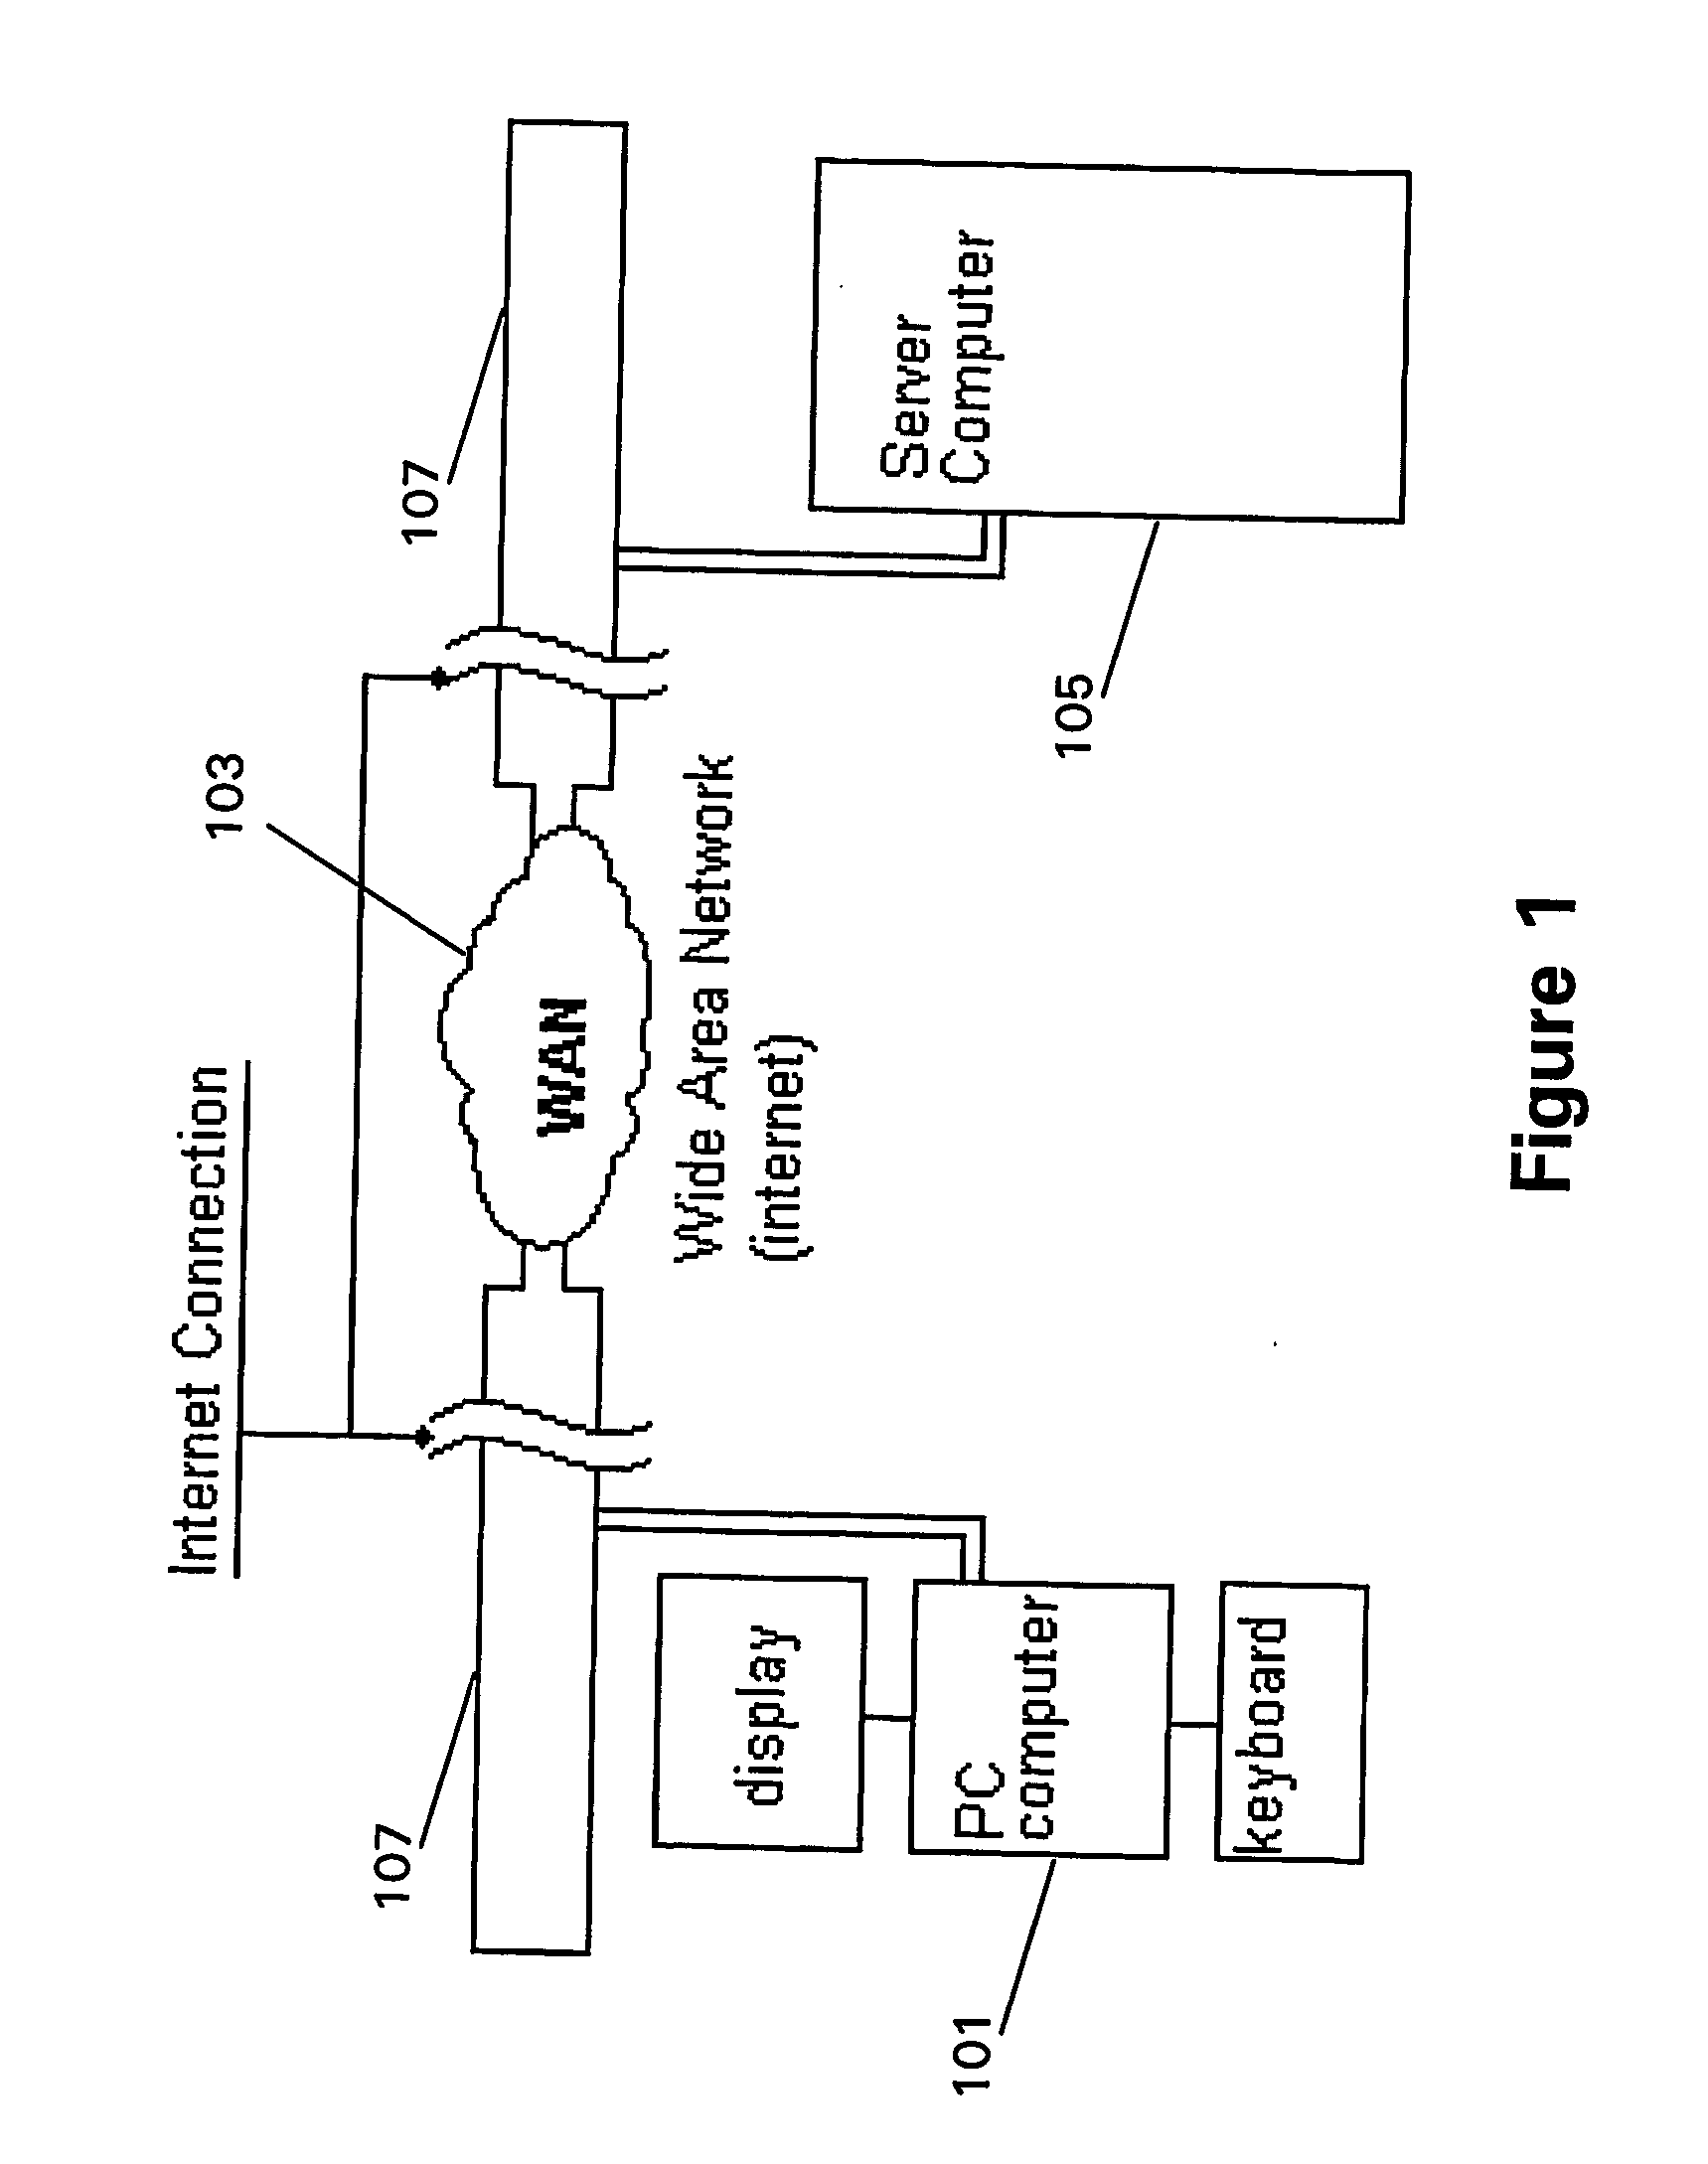 Searching apparatus and methods